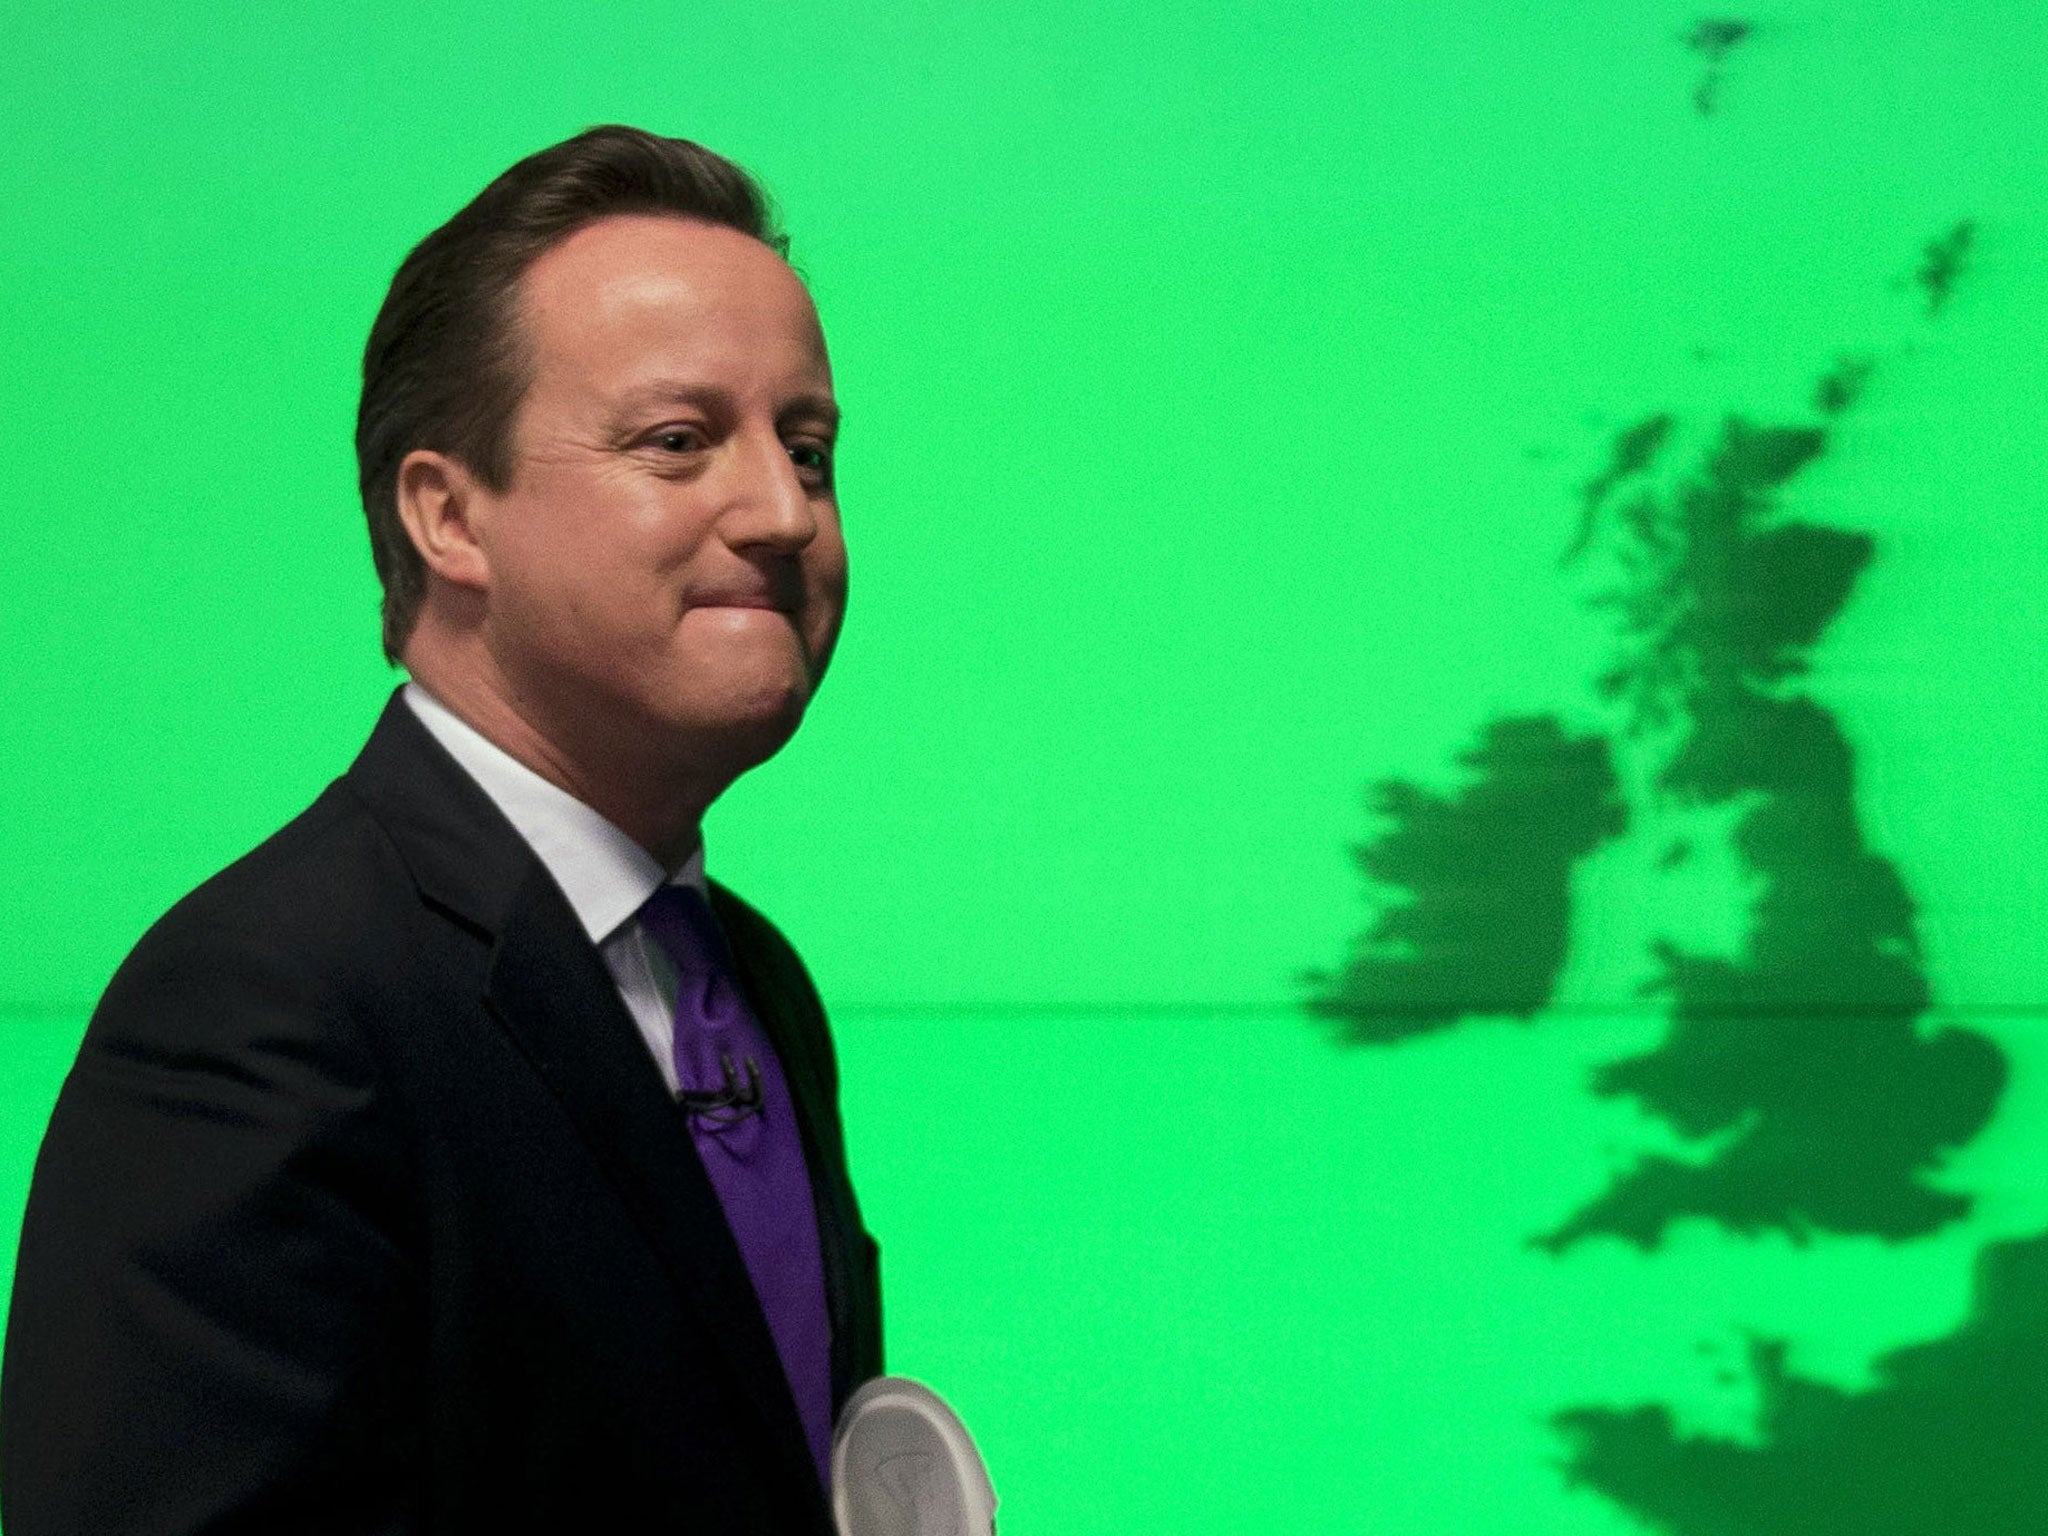 Prime Minister David Cameron walks off stage after his speech on Europe